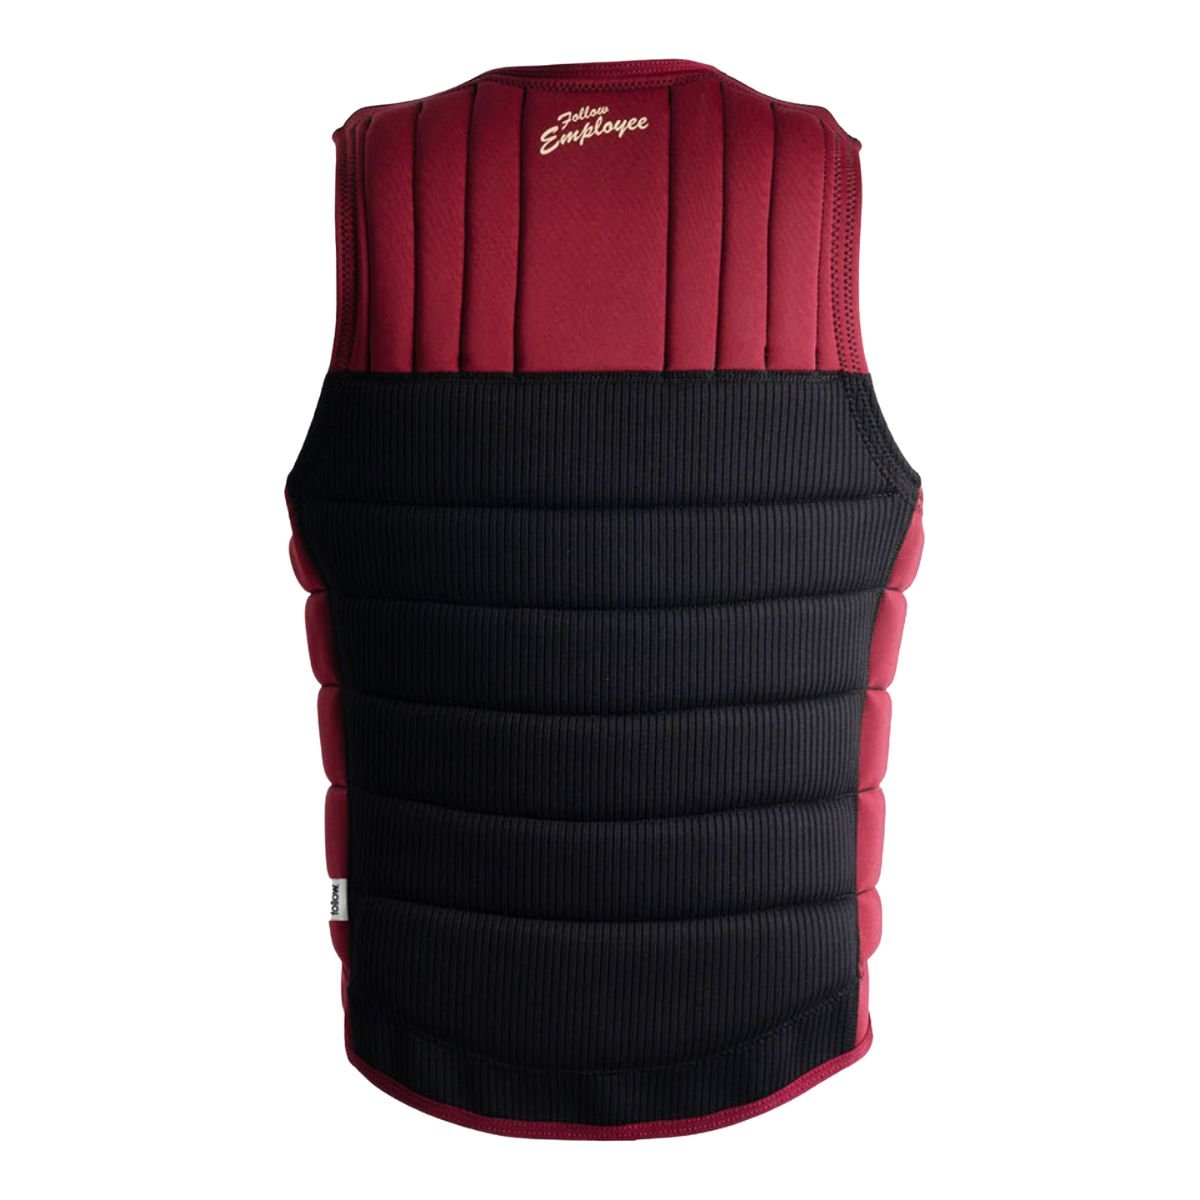 Follow Employee of the Month Comp Wake Vest in Black/Maroon - BoardCo